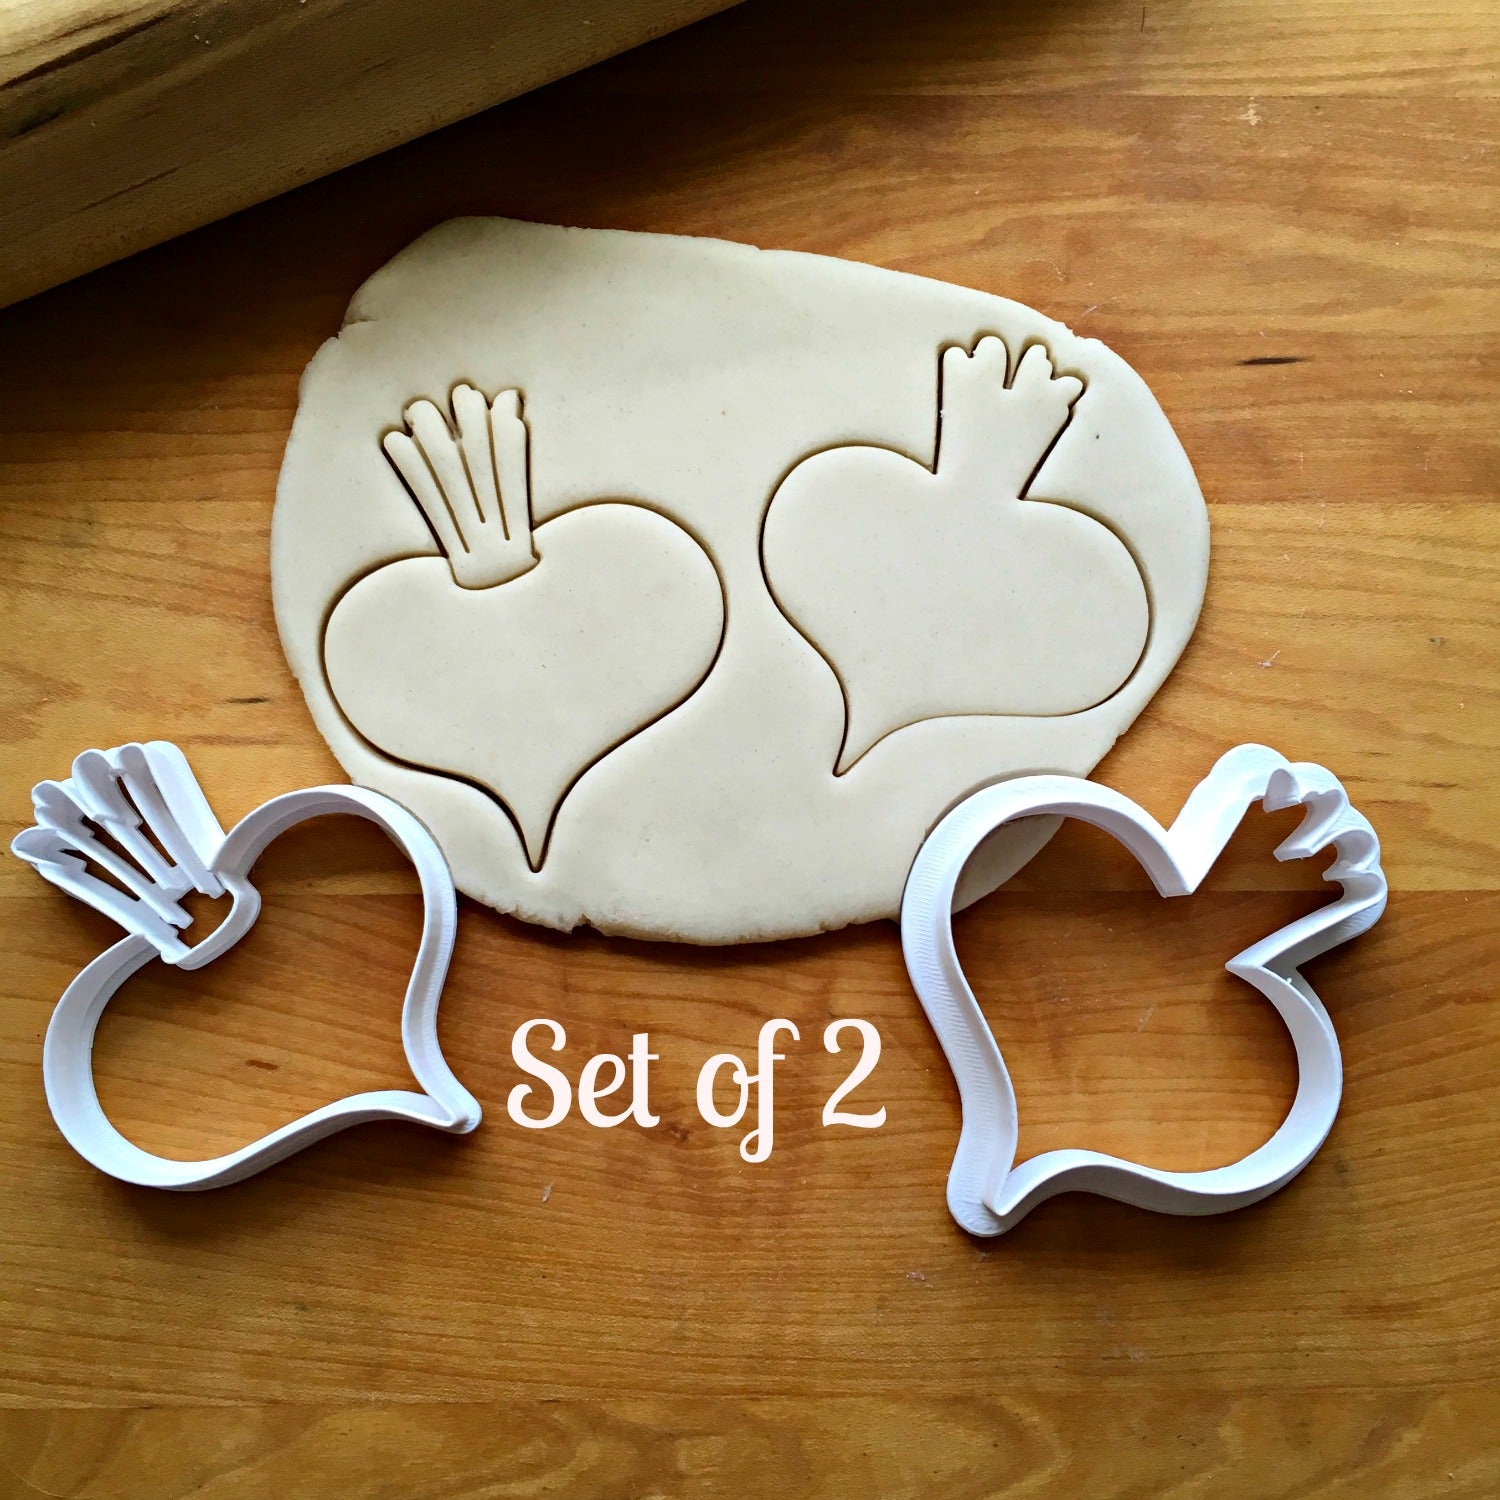 Set of 2 Beet Cookie Cutters/Dishwasher Safe